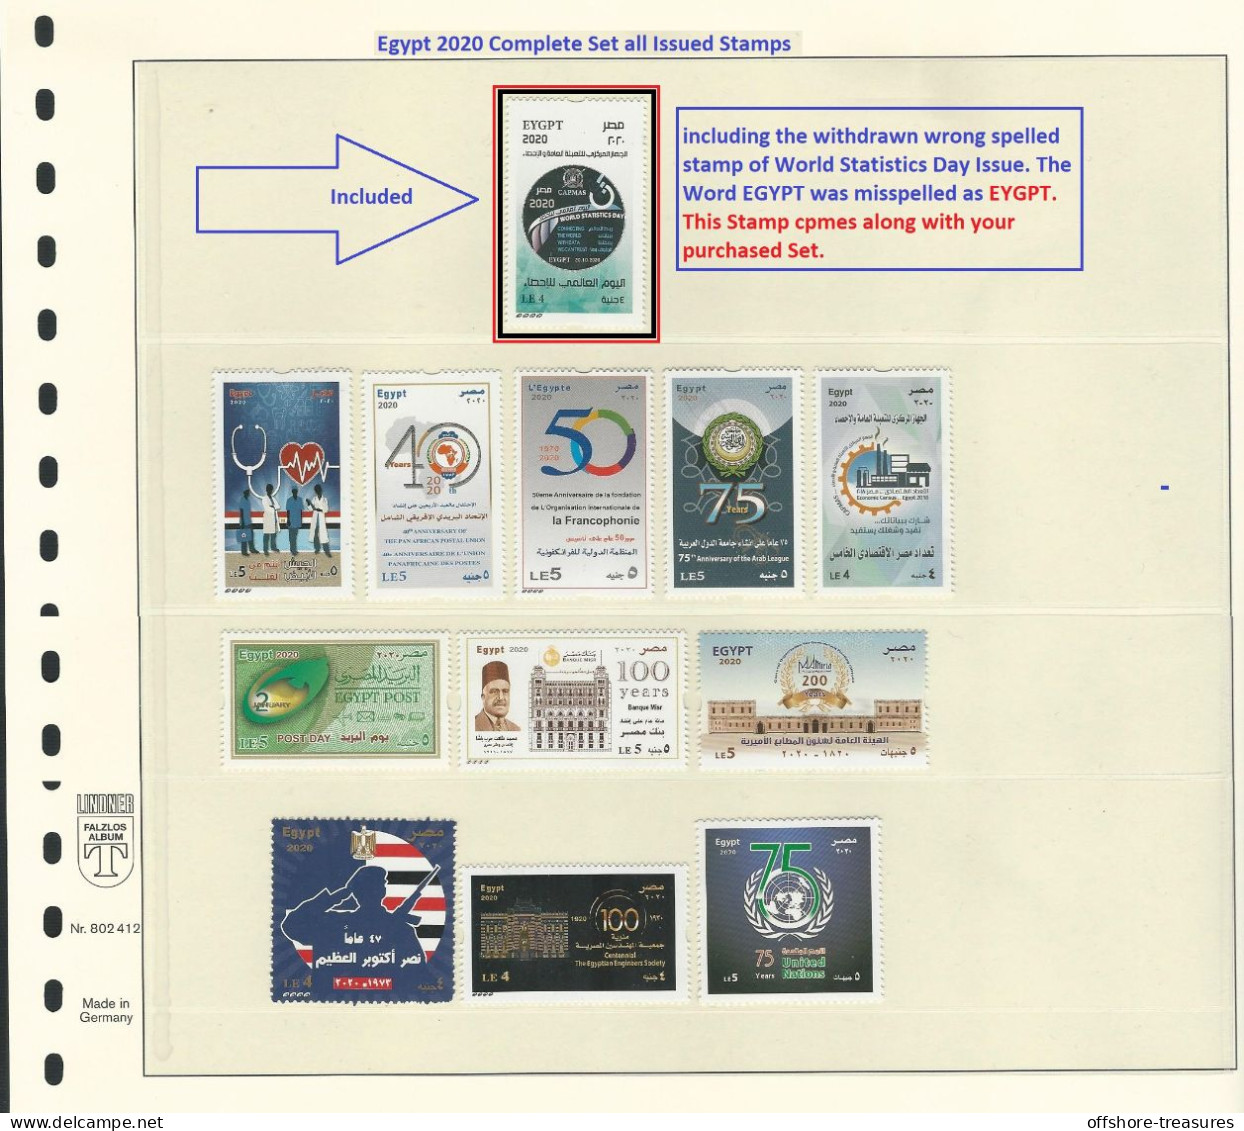 Egypt EGYPTE 2020 ONE YEAR Full Set Stamps ALL Commemorative Issued INCL Error World Statistics Day Stamp - Neufs